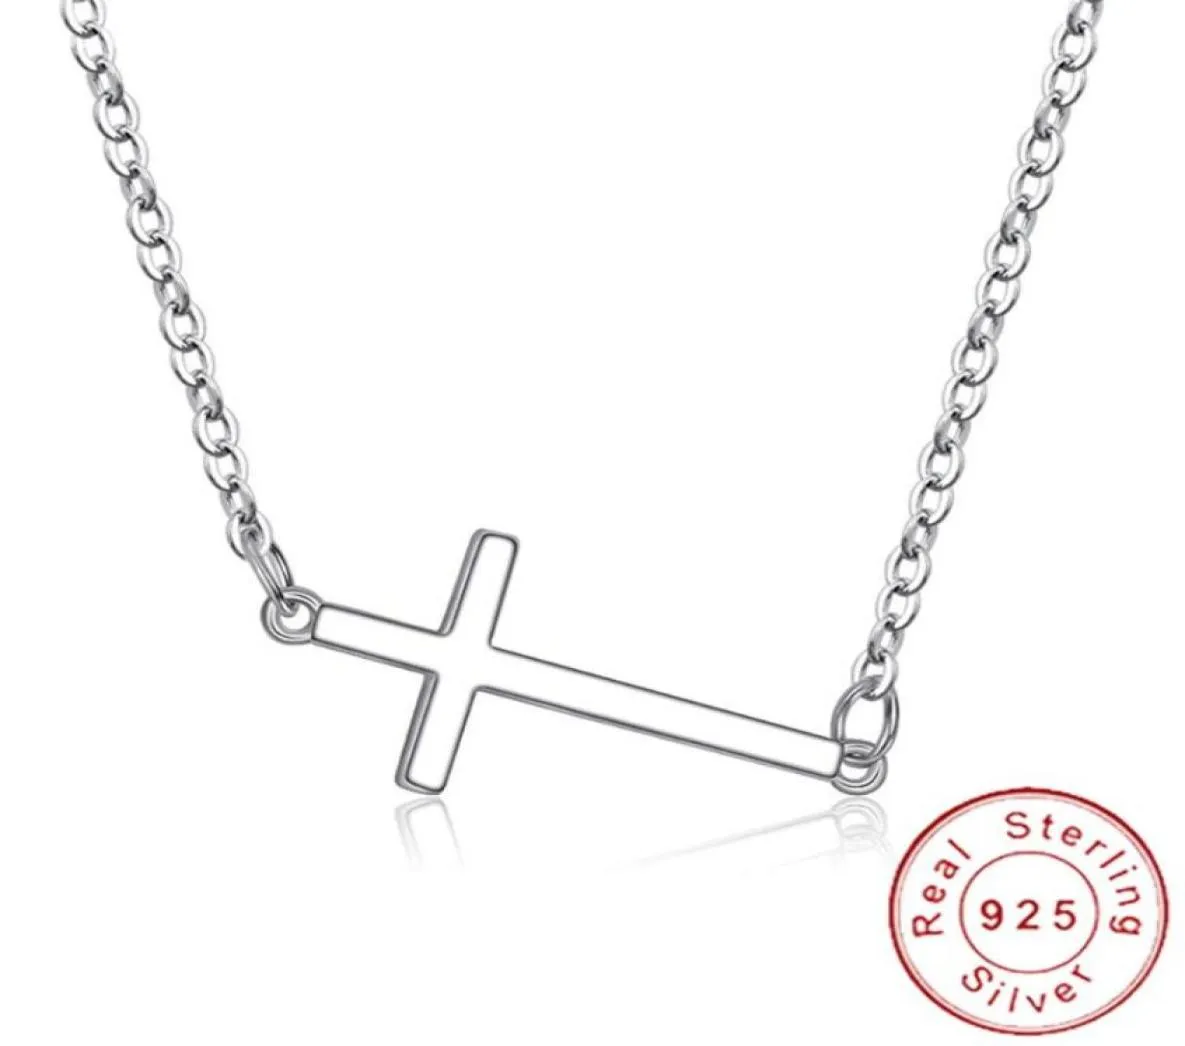 DESYLY REAL 925 STERLING Silver Horizontal Collier Collier Crucifix Crucifix Jewelry Inspired Inspired Sn011 Choke9040361